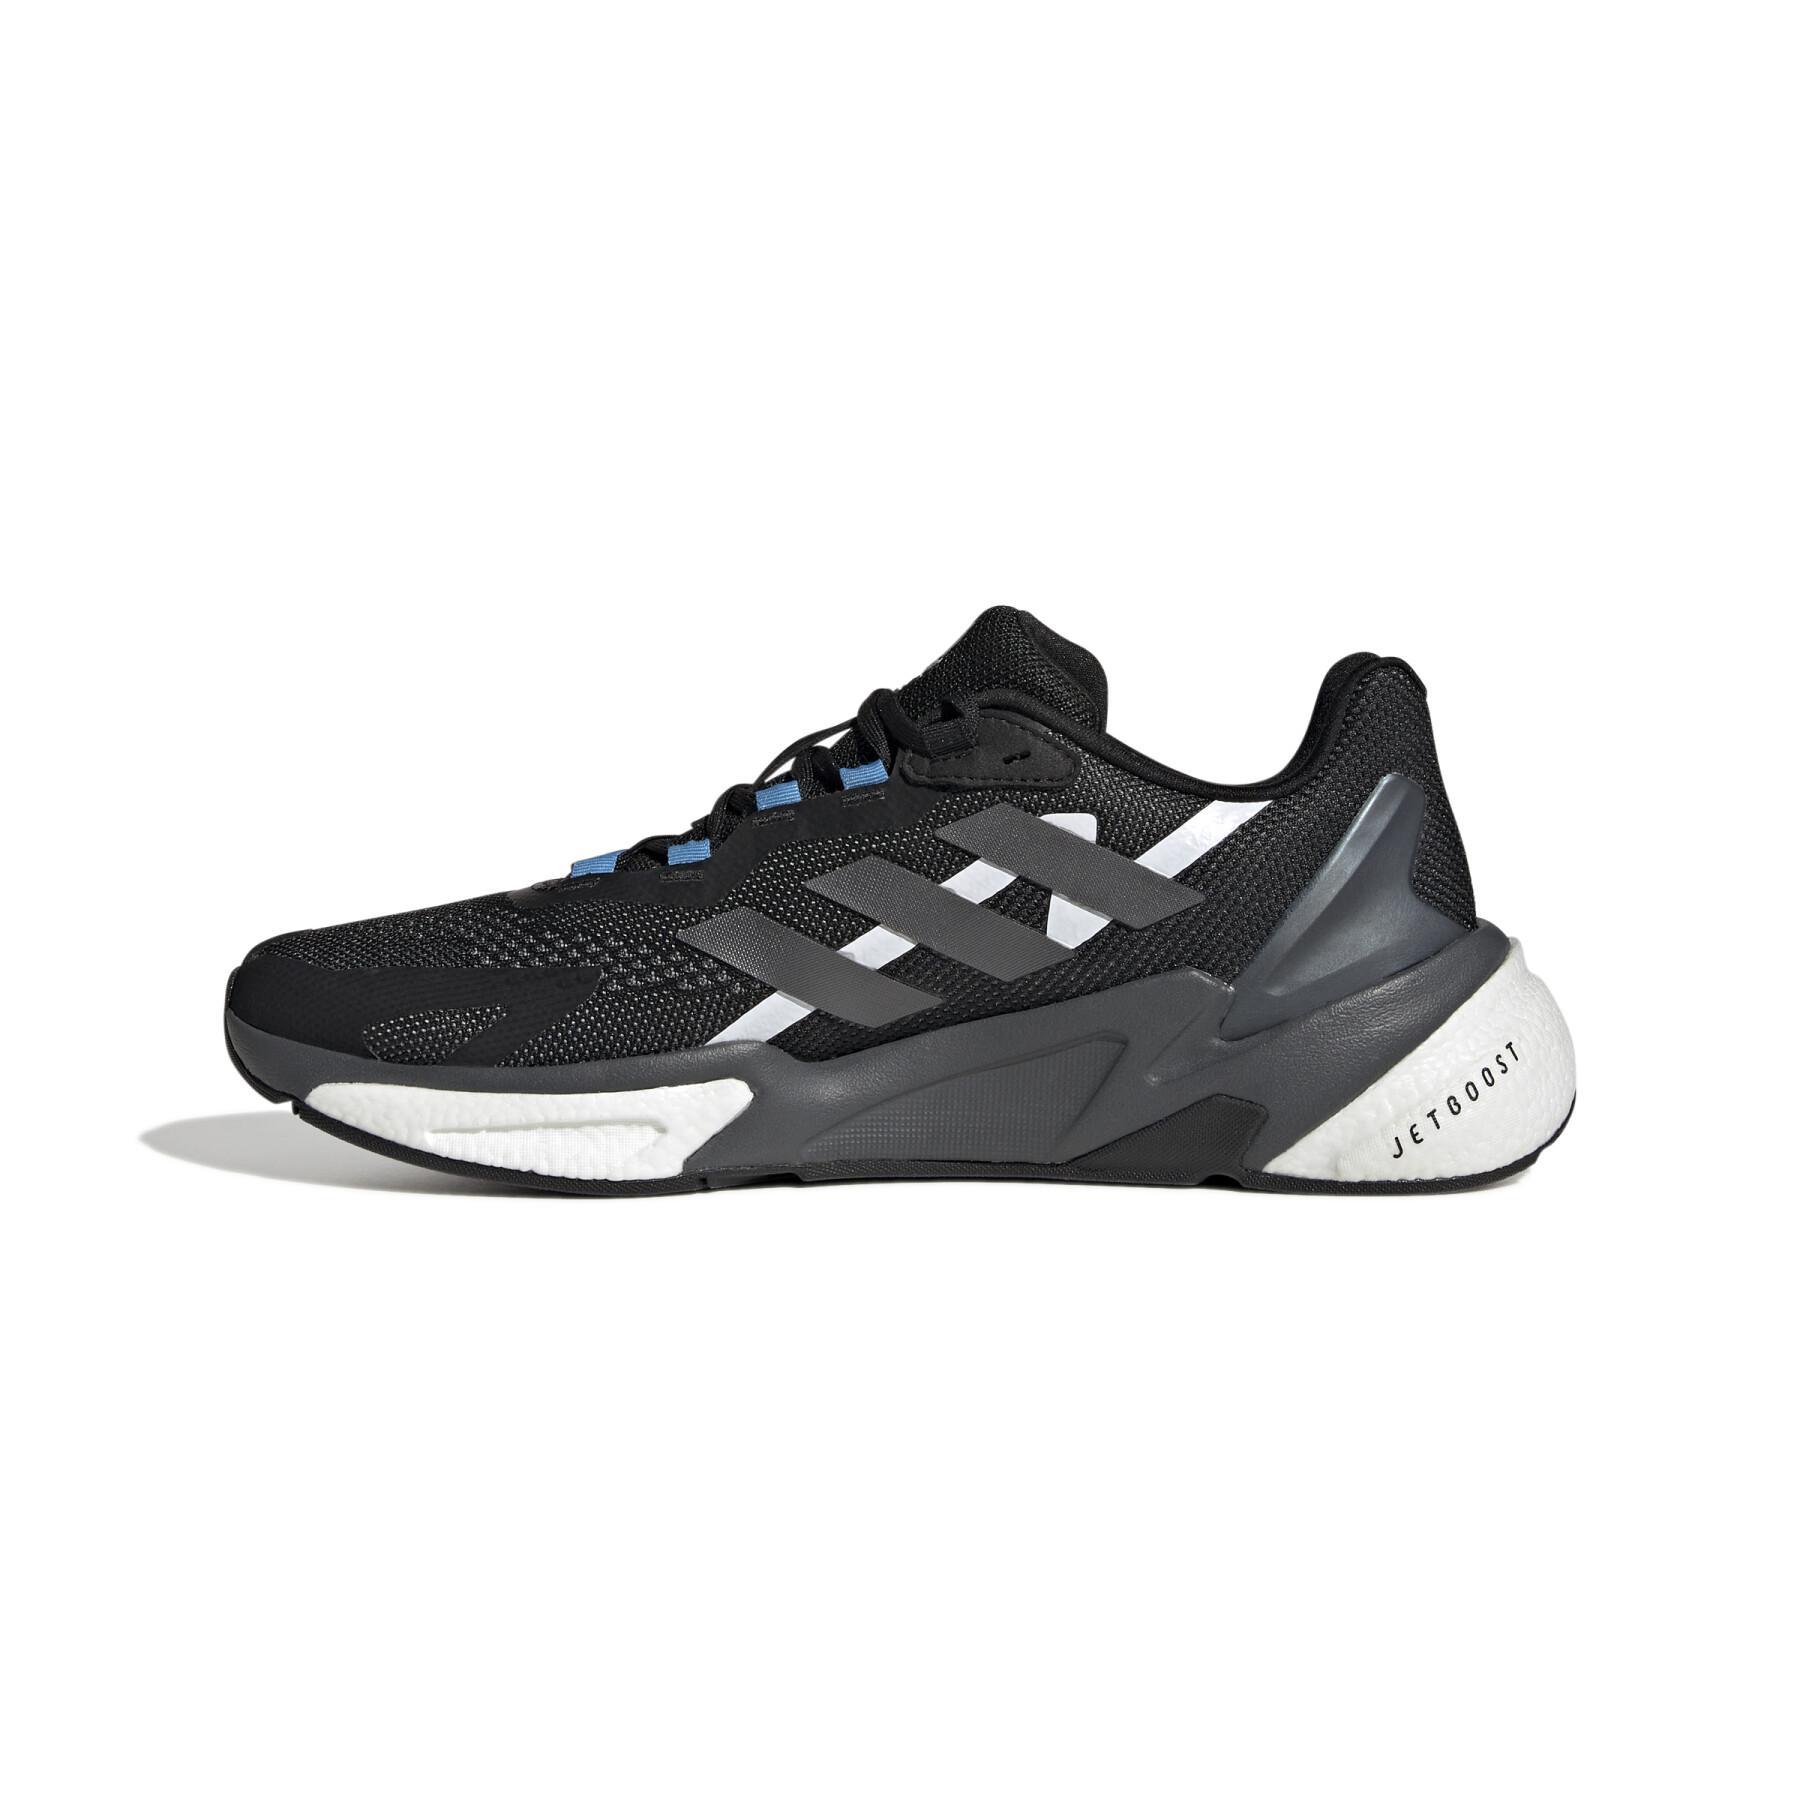 Running shoes adidas X9L3